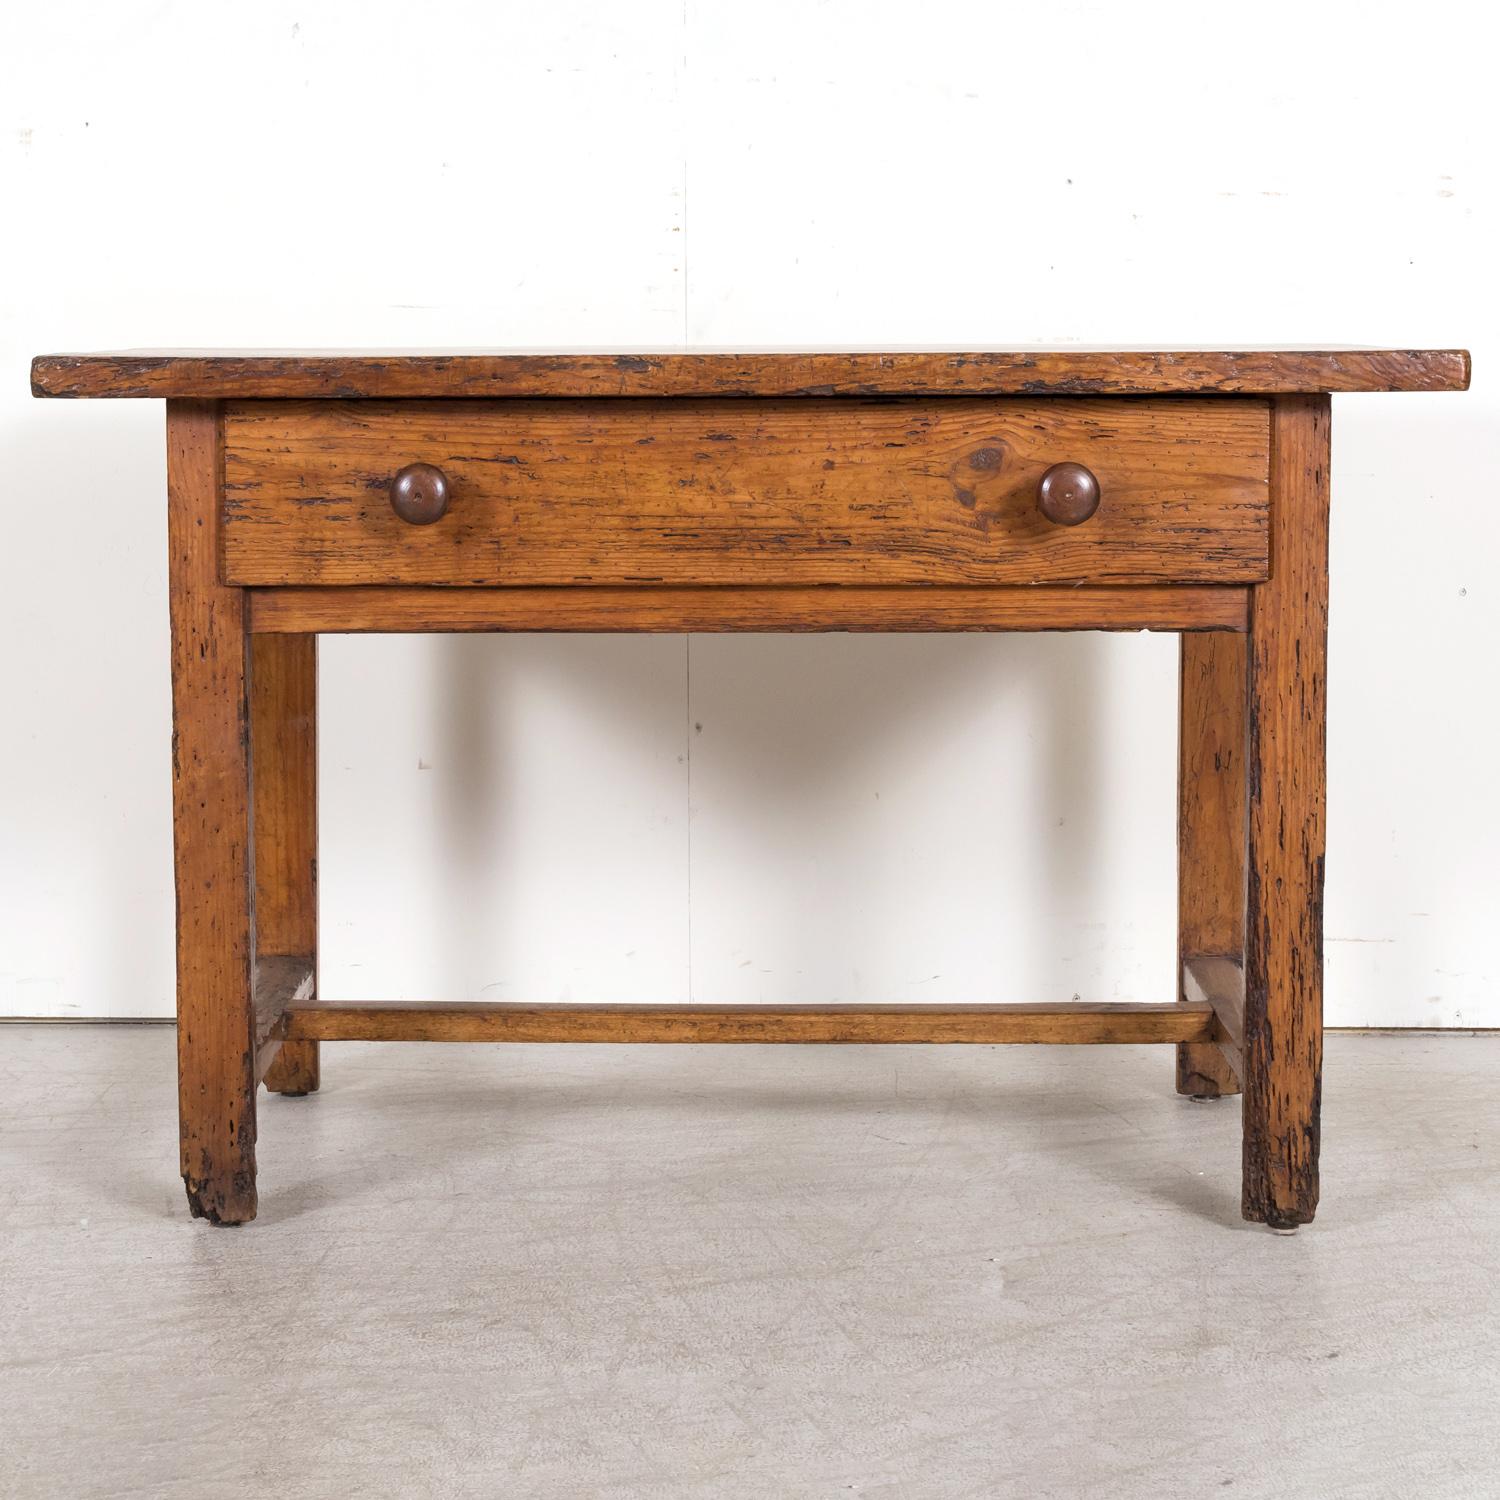 18th Century French Provincial Primitive Larch Wood Side Table or Desk with Draw In Good Condition For Sale In Birmingham, AL